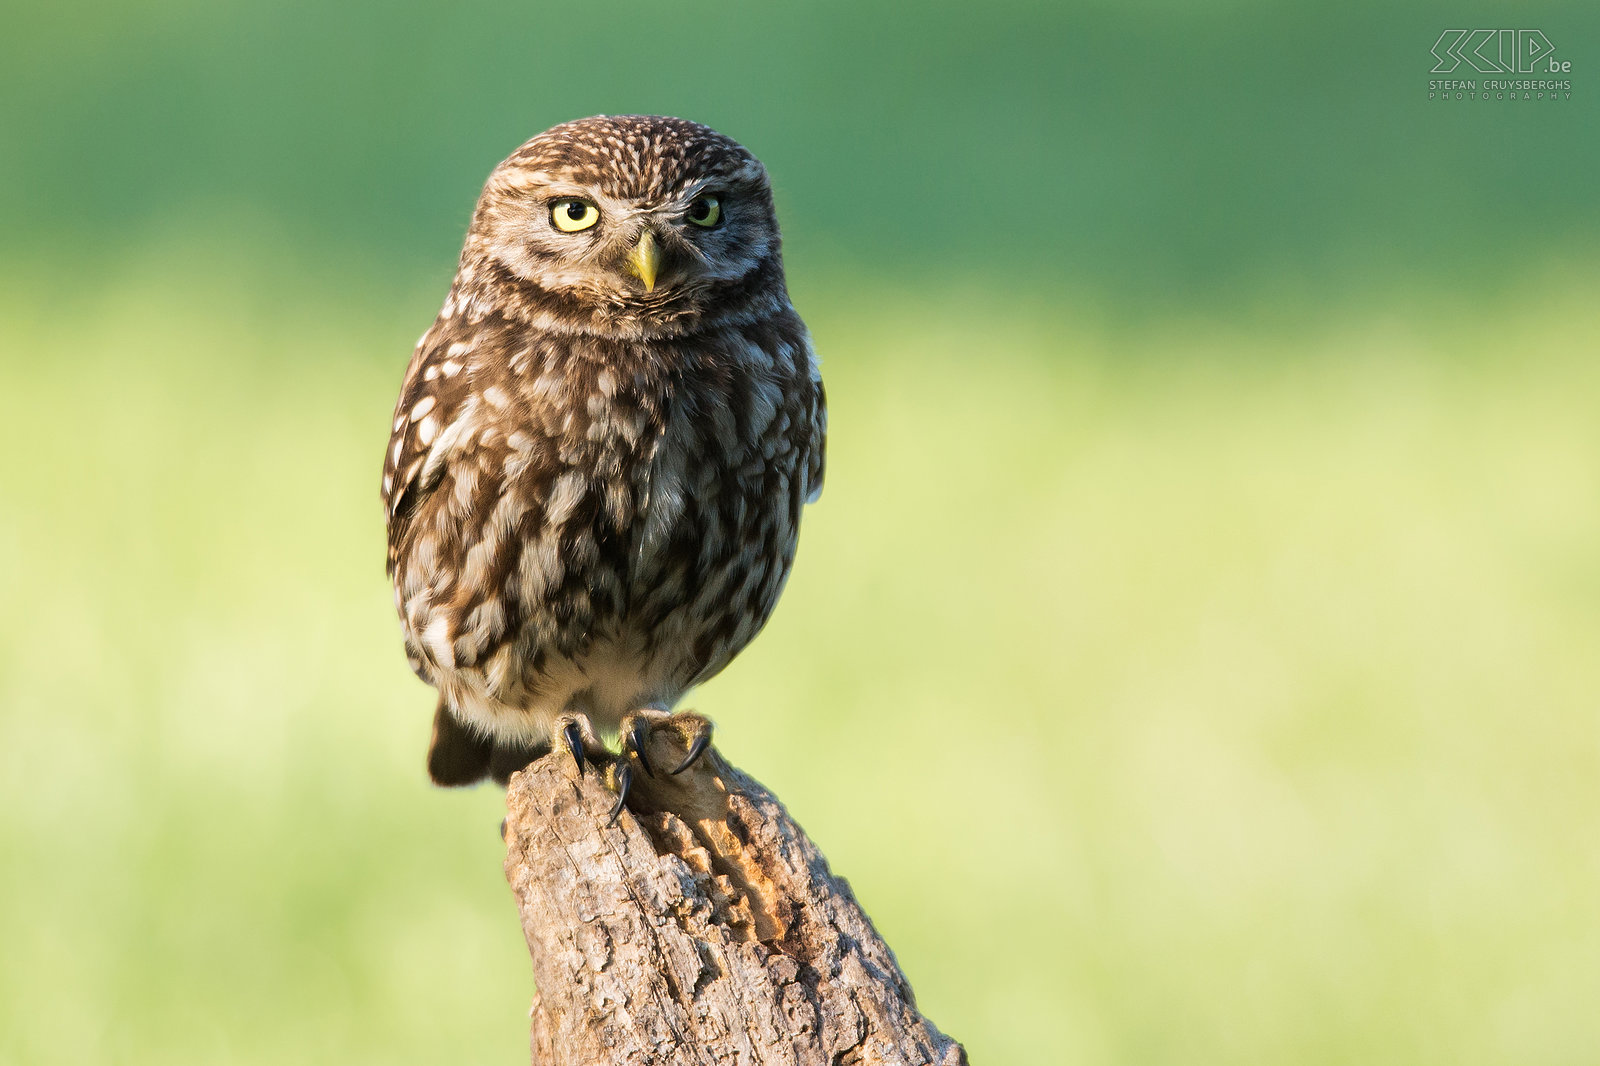 Little owls The little owl (Athene noctua) is one of the smallest owls in the Lowlands. The little owl is mainly nocturnal and can be found in a wide range of habitats including farmland, woodland, heathland, … It feeds on insects and small vertebrates like mices.<br />
 Stefan Cruysberghs